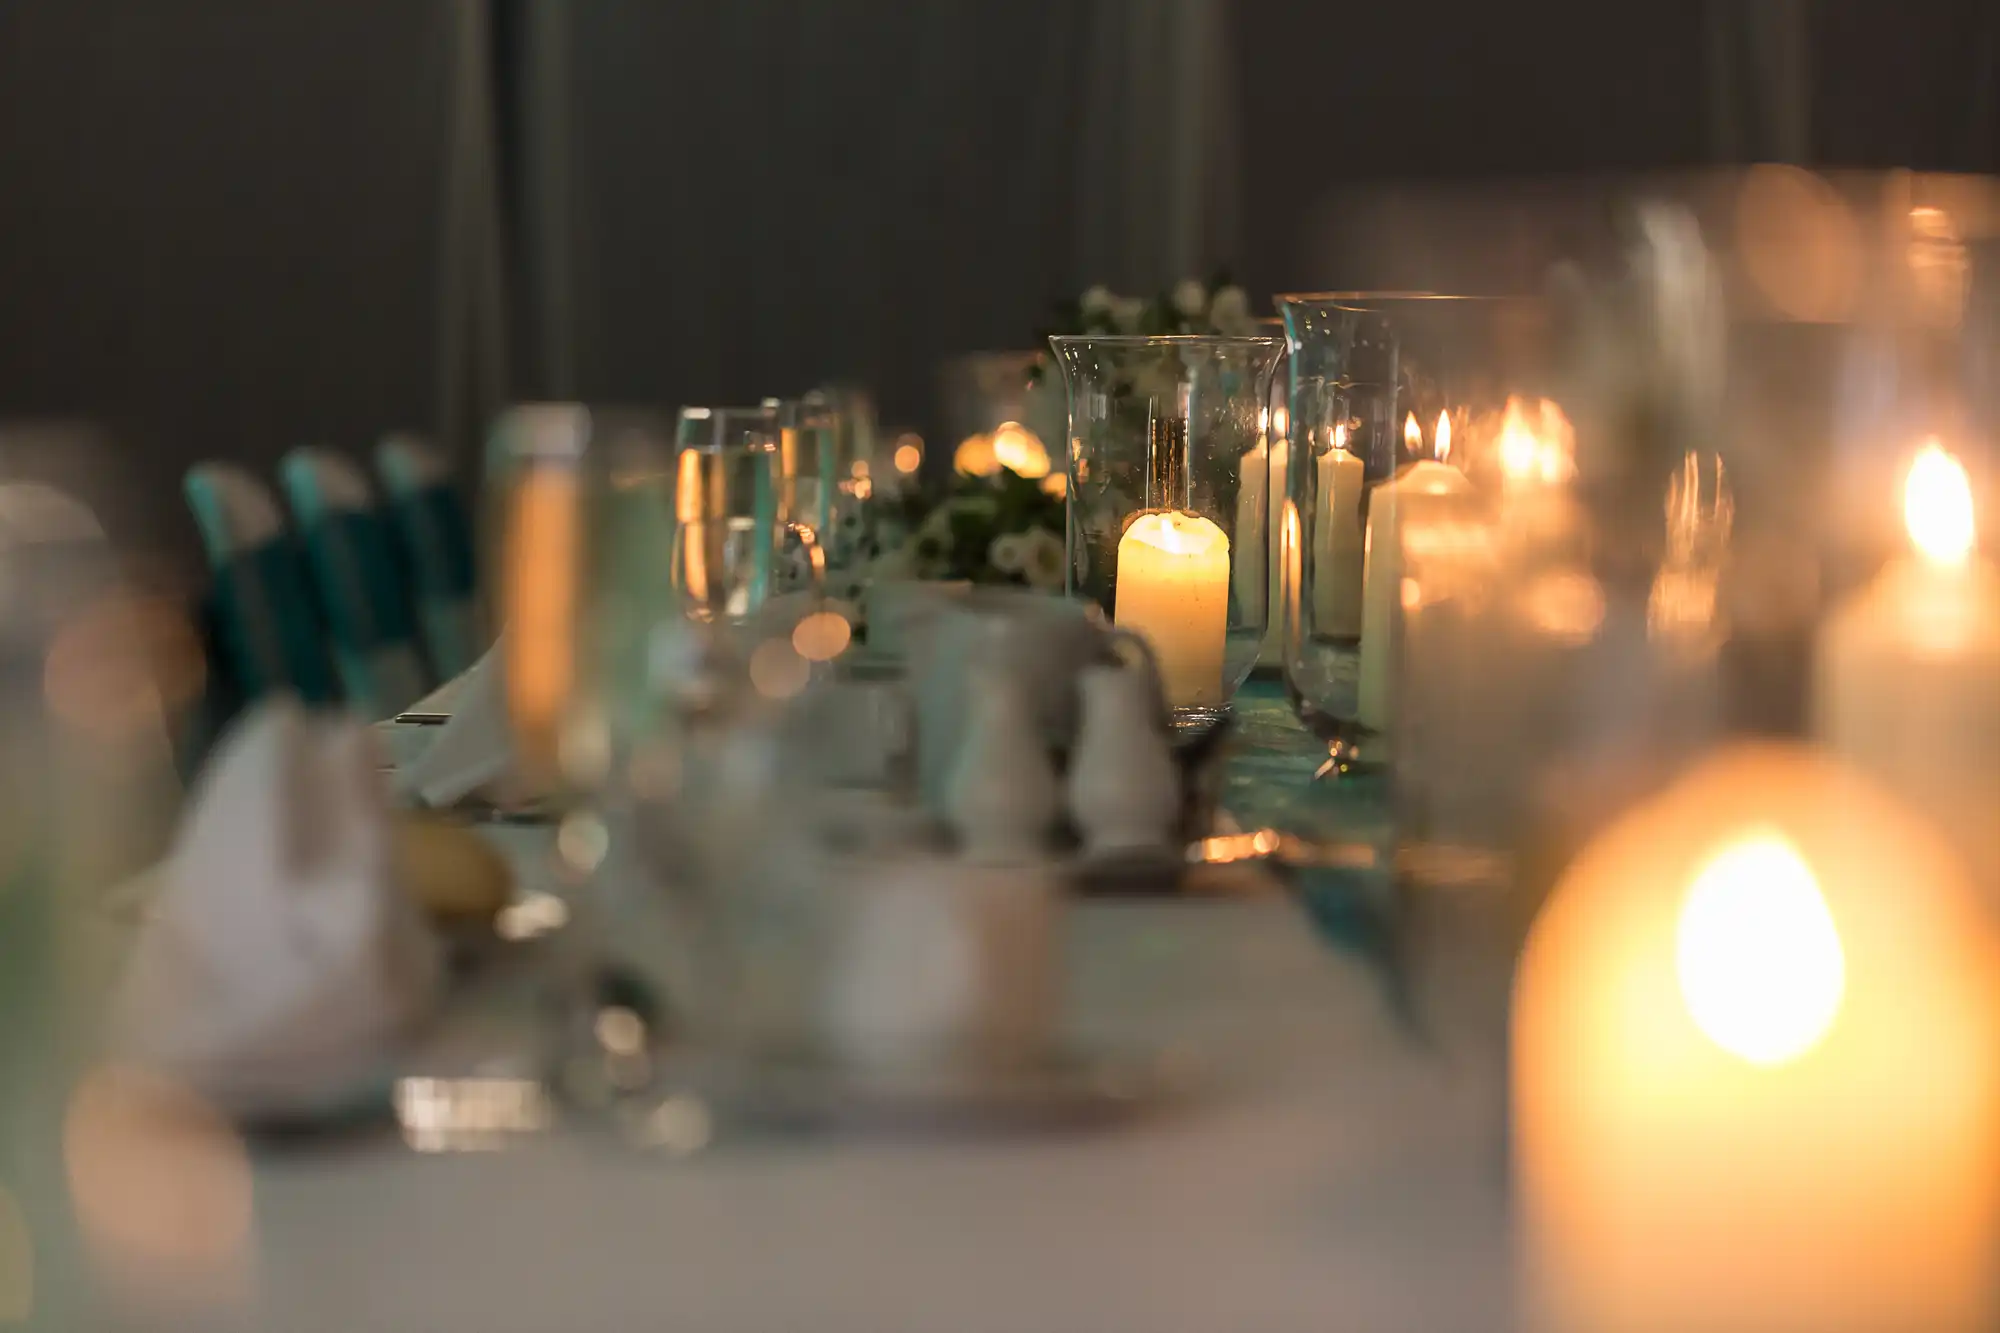 Elegant dinner table setting featuring lit candles, floral centerpieces, and soft lighting, creating an intimate ambiance.